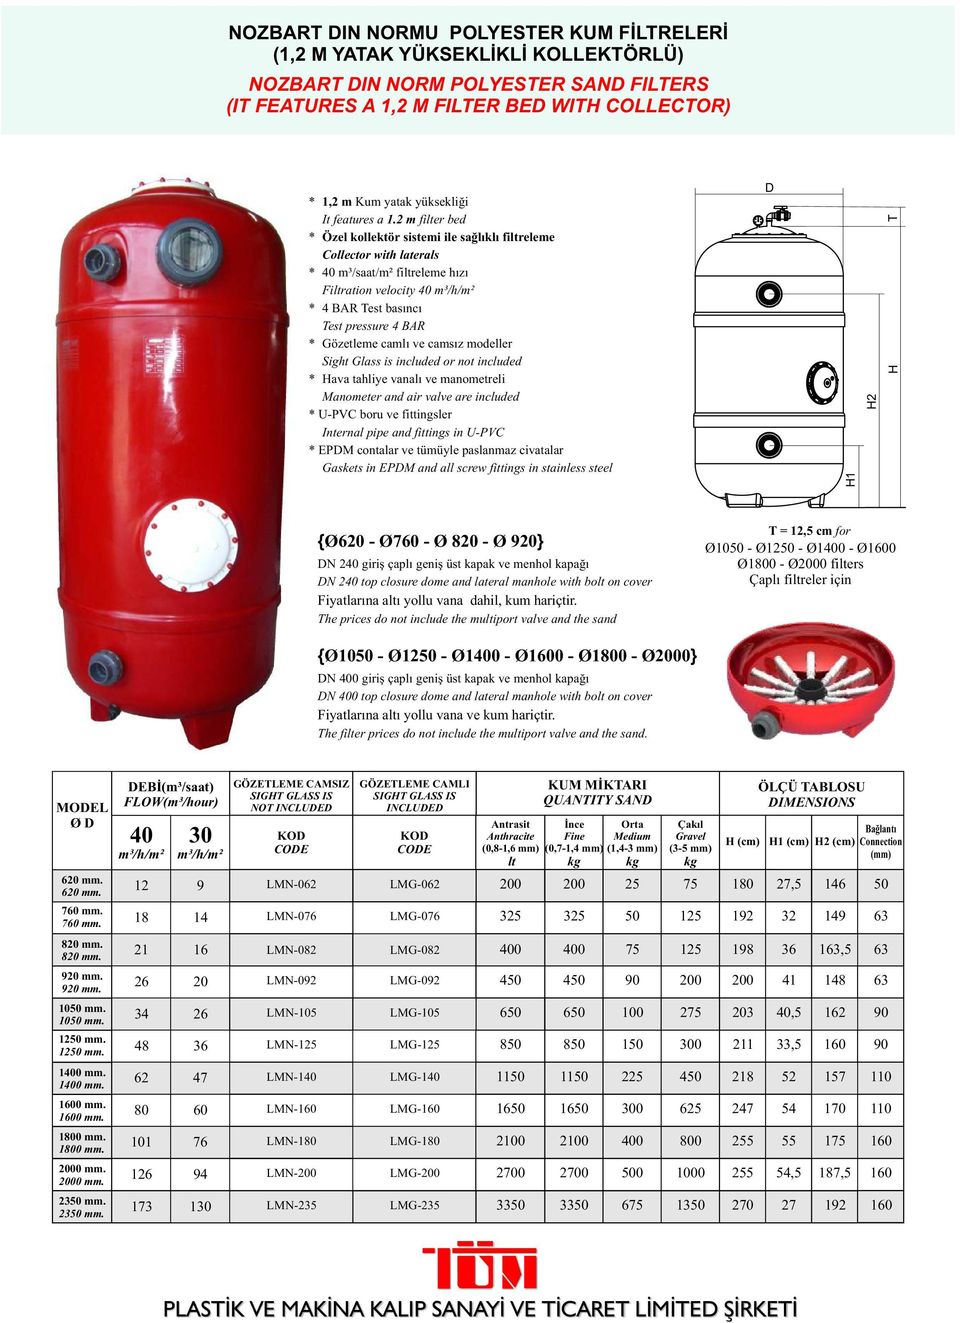 ve camsız modeller Sight Glass is included or not included * Hava tahliye vanalı ve manometreli Manometer and air valve are included * UPVC boru ve fittingsler Internal pipe and fittings in UPVC *